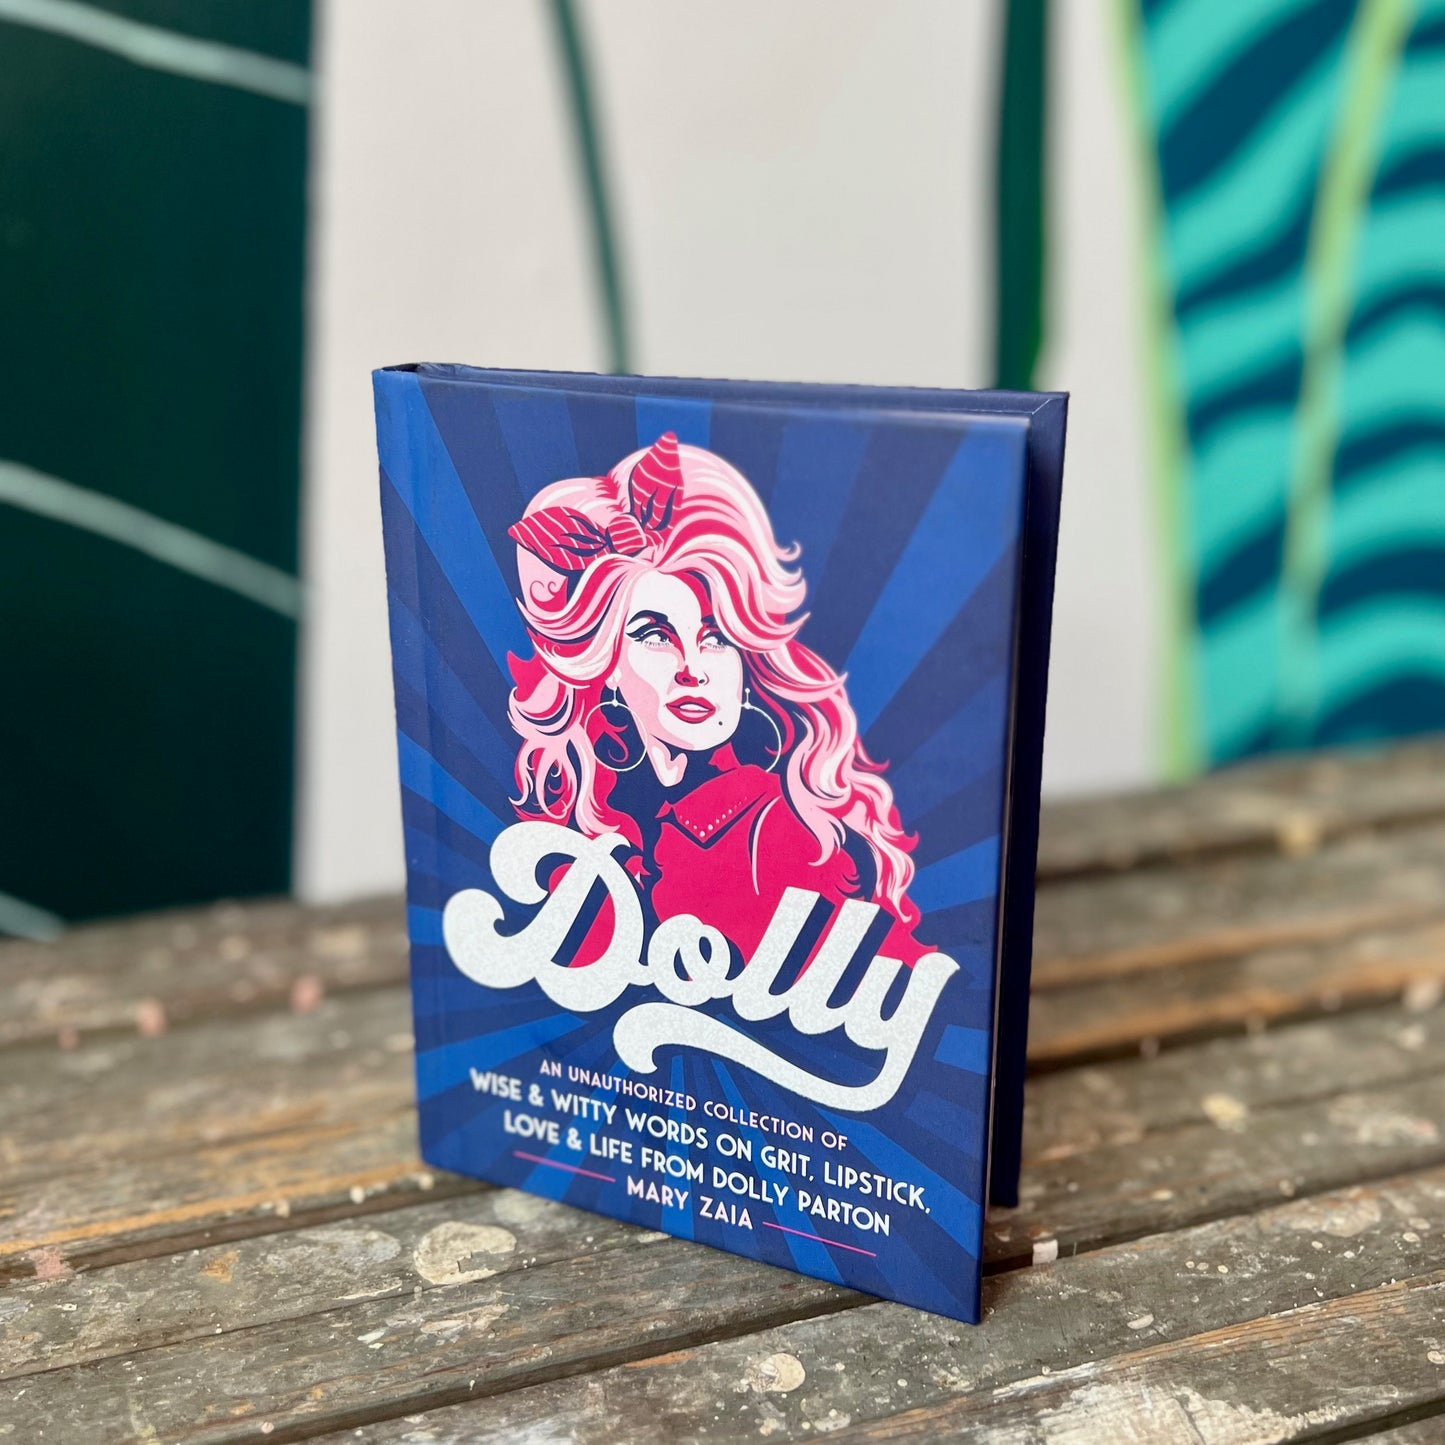 Dolly Book